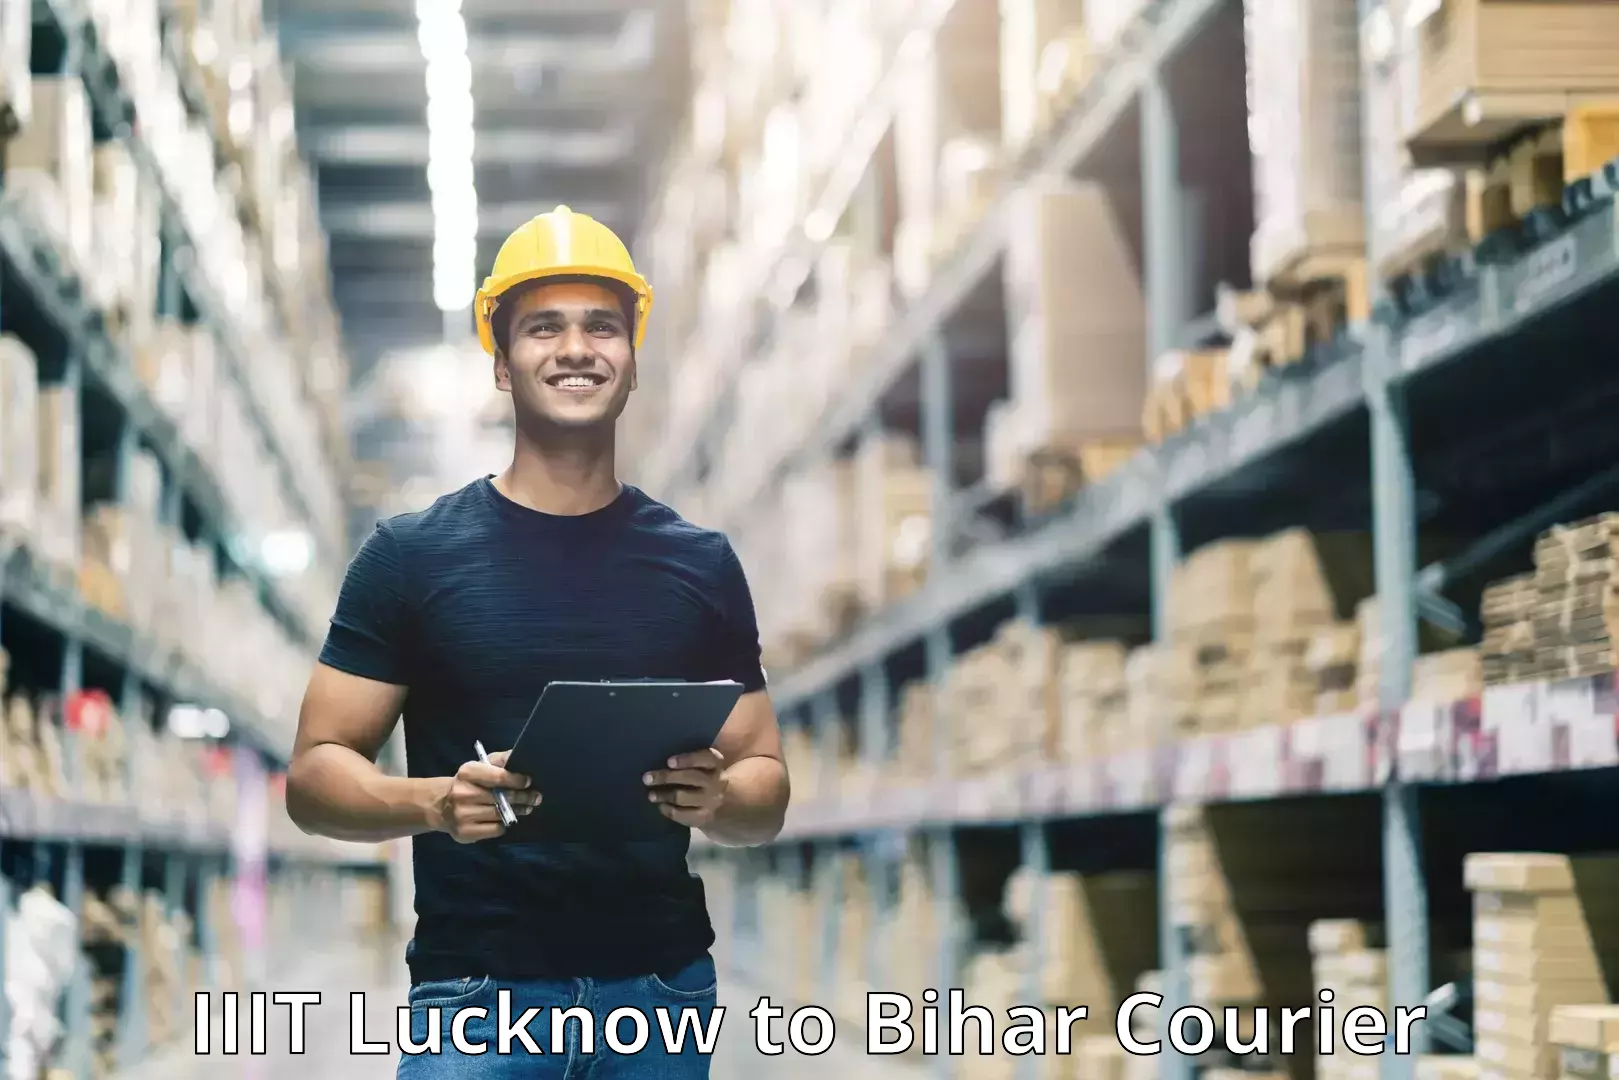 Customer-oriented courier services IIIT Lucknow to Bihar